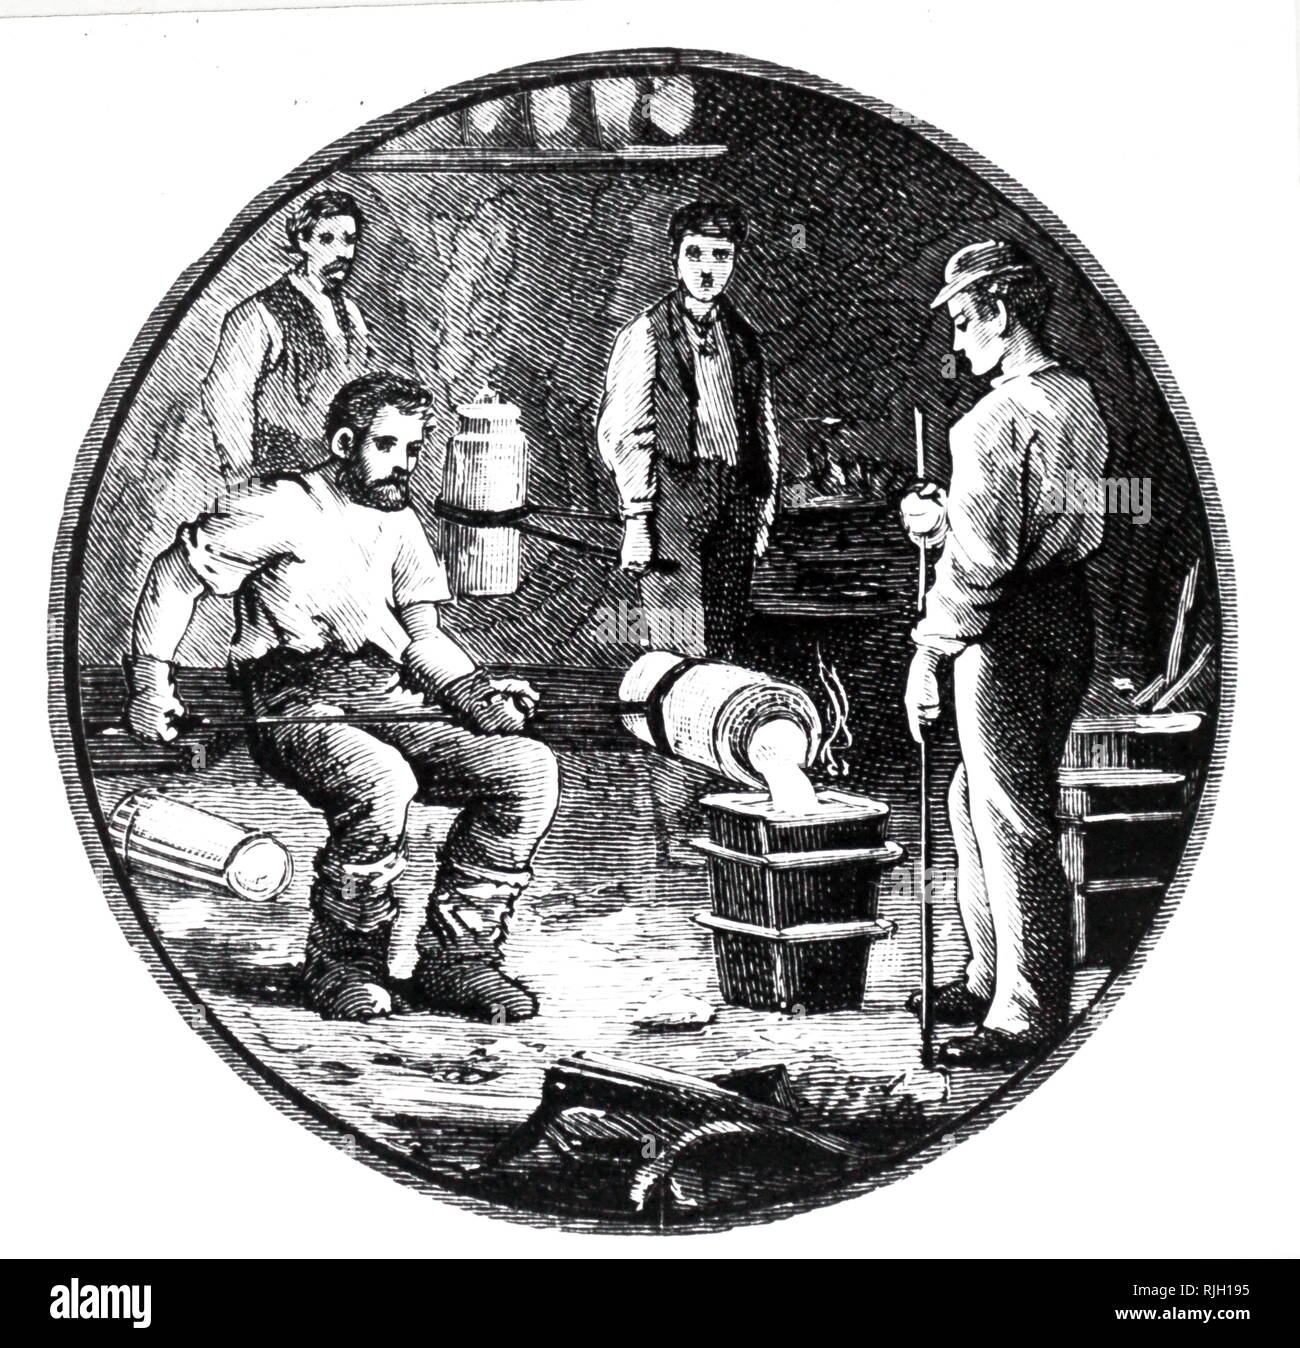 An engraving depicting the casting of crucible steel. To protect his legs and feet the man pouring the metal has wrapped them in damp sacking. Dated 19th century Stock Photo